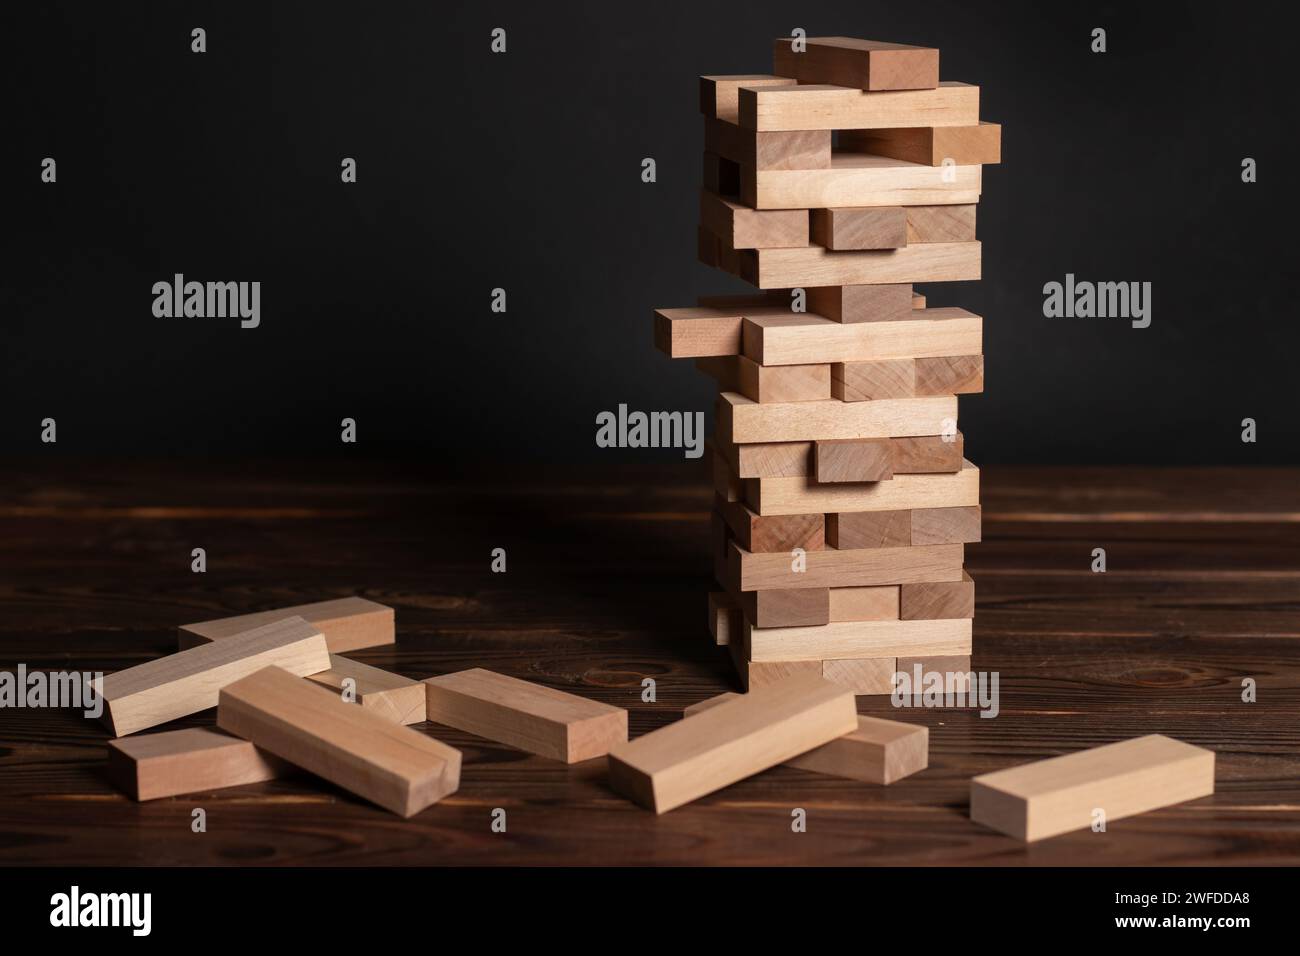 Jenga tower made of wooden blocks on wooden background, space for text. Stock Photo